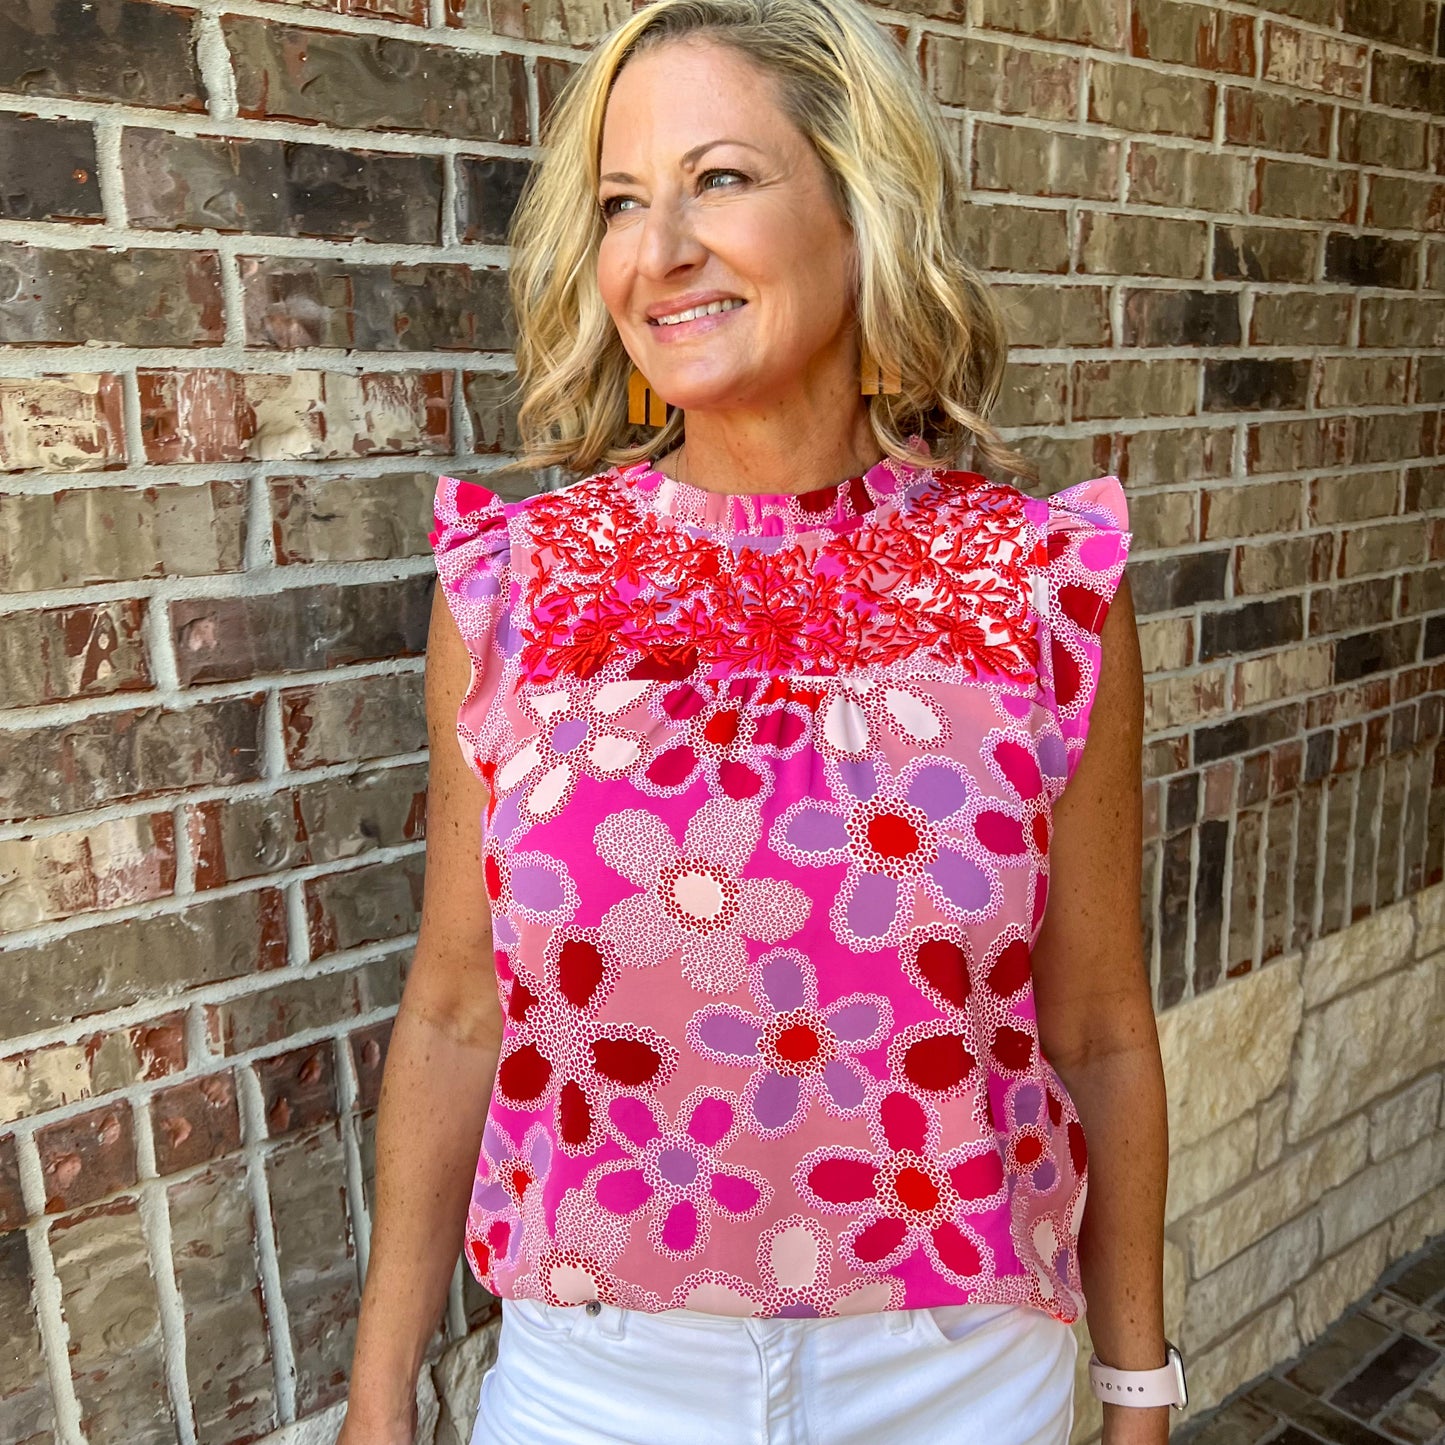 Charlotte Embroidered Floral Print Top